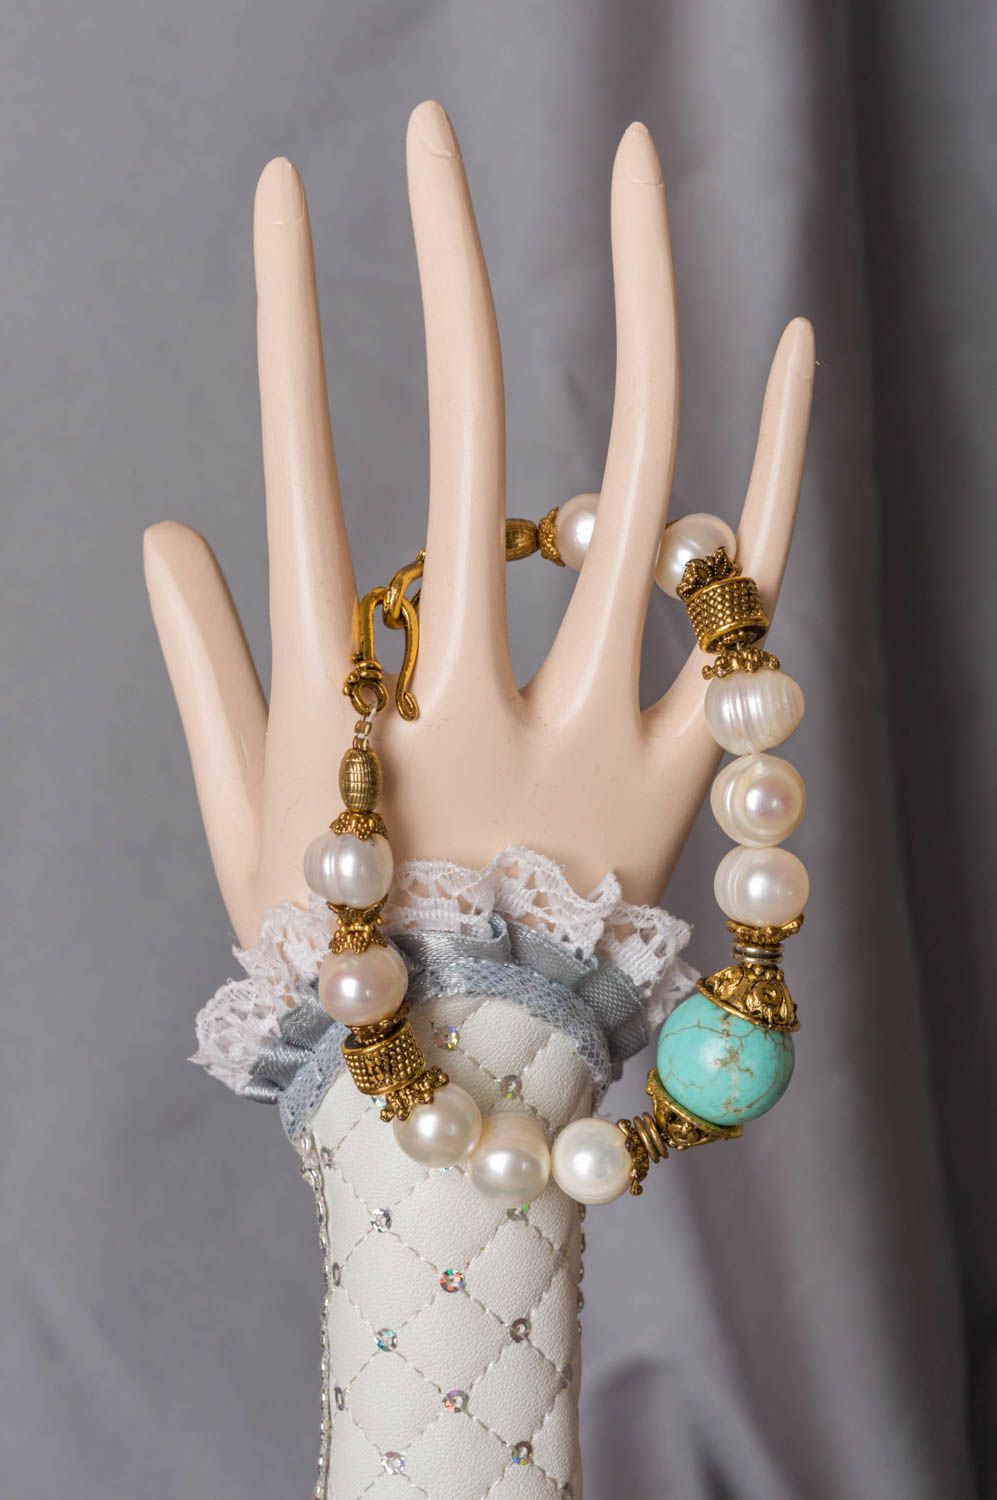 Handmade magnificent tender wrist bracelet with pearls and turquoise stone beads photo 1